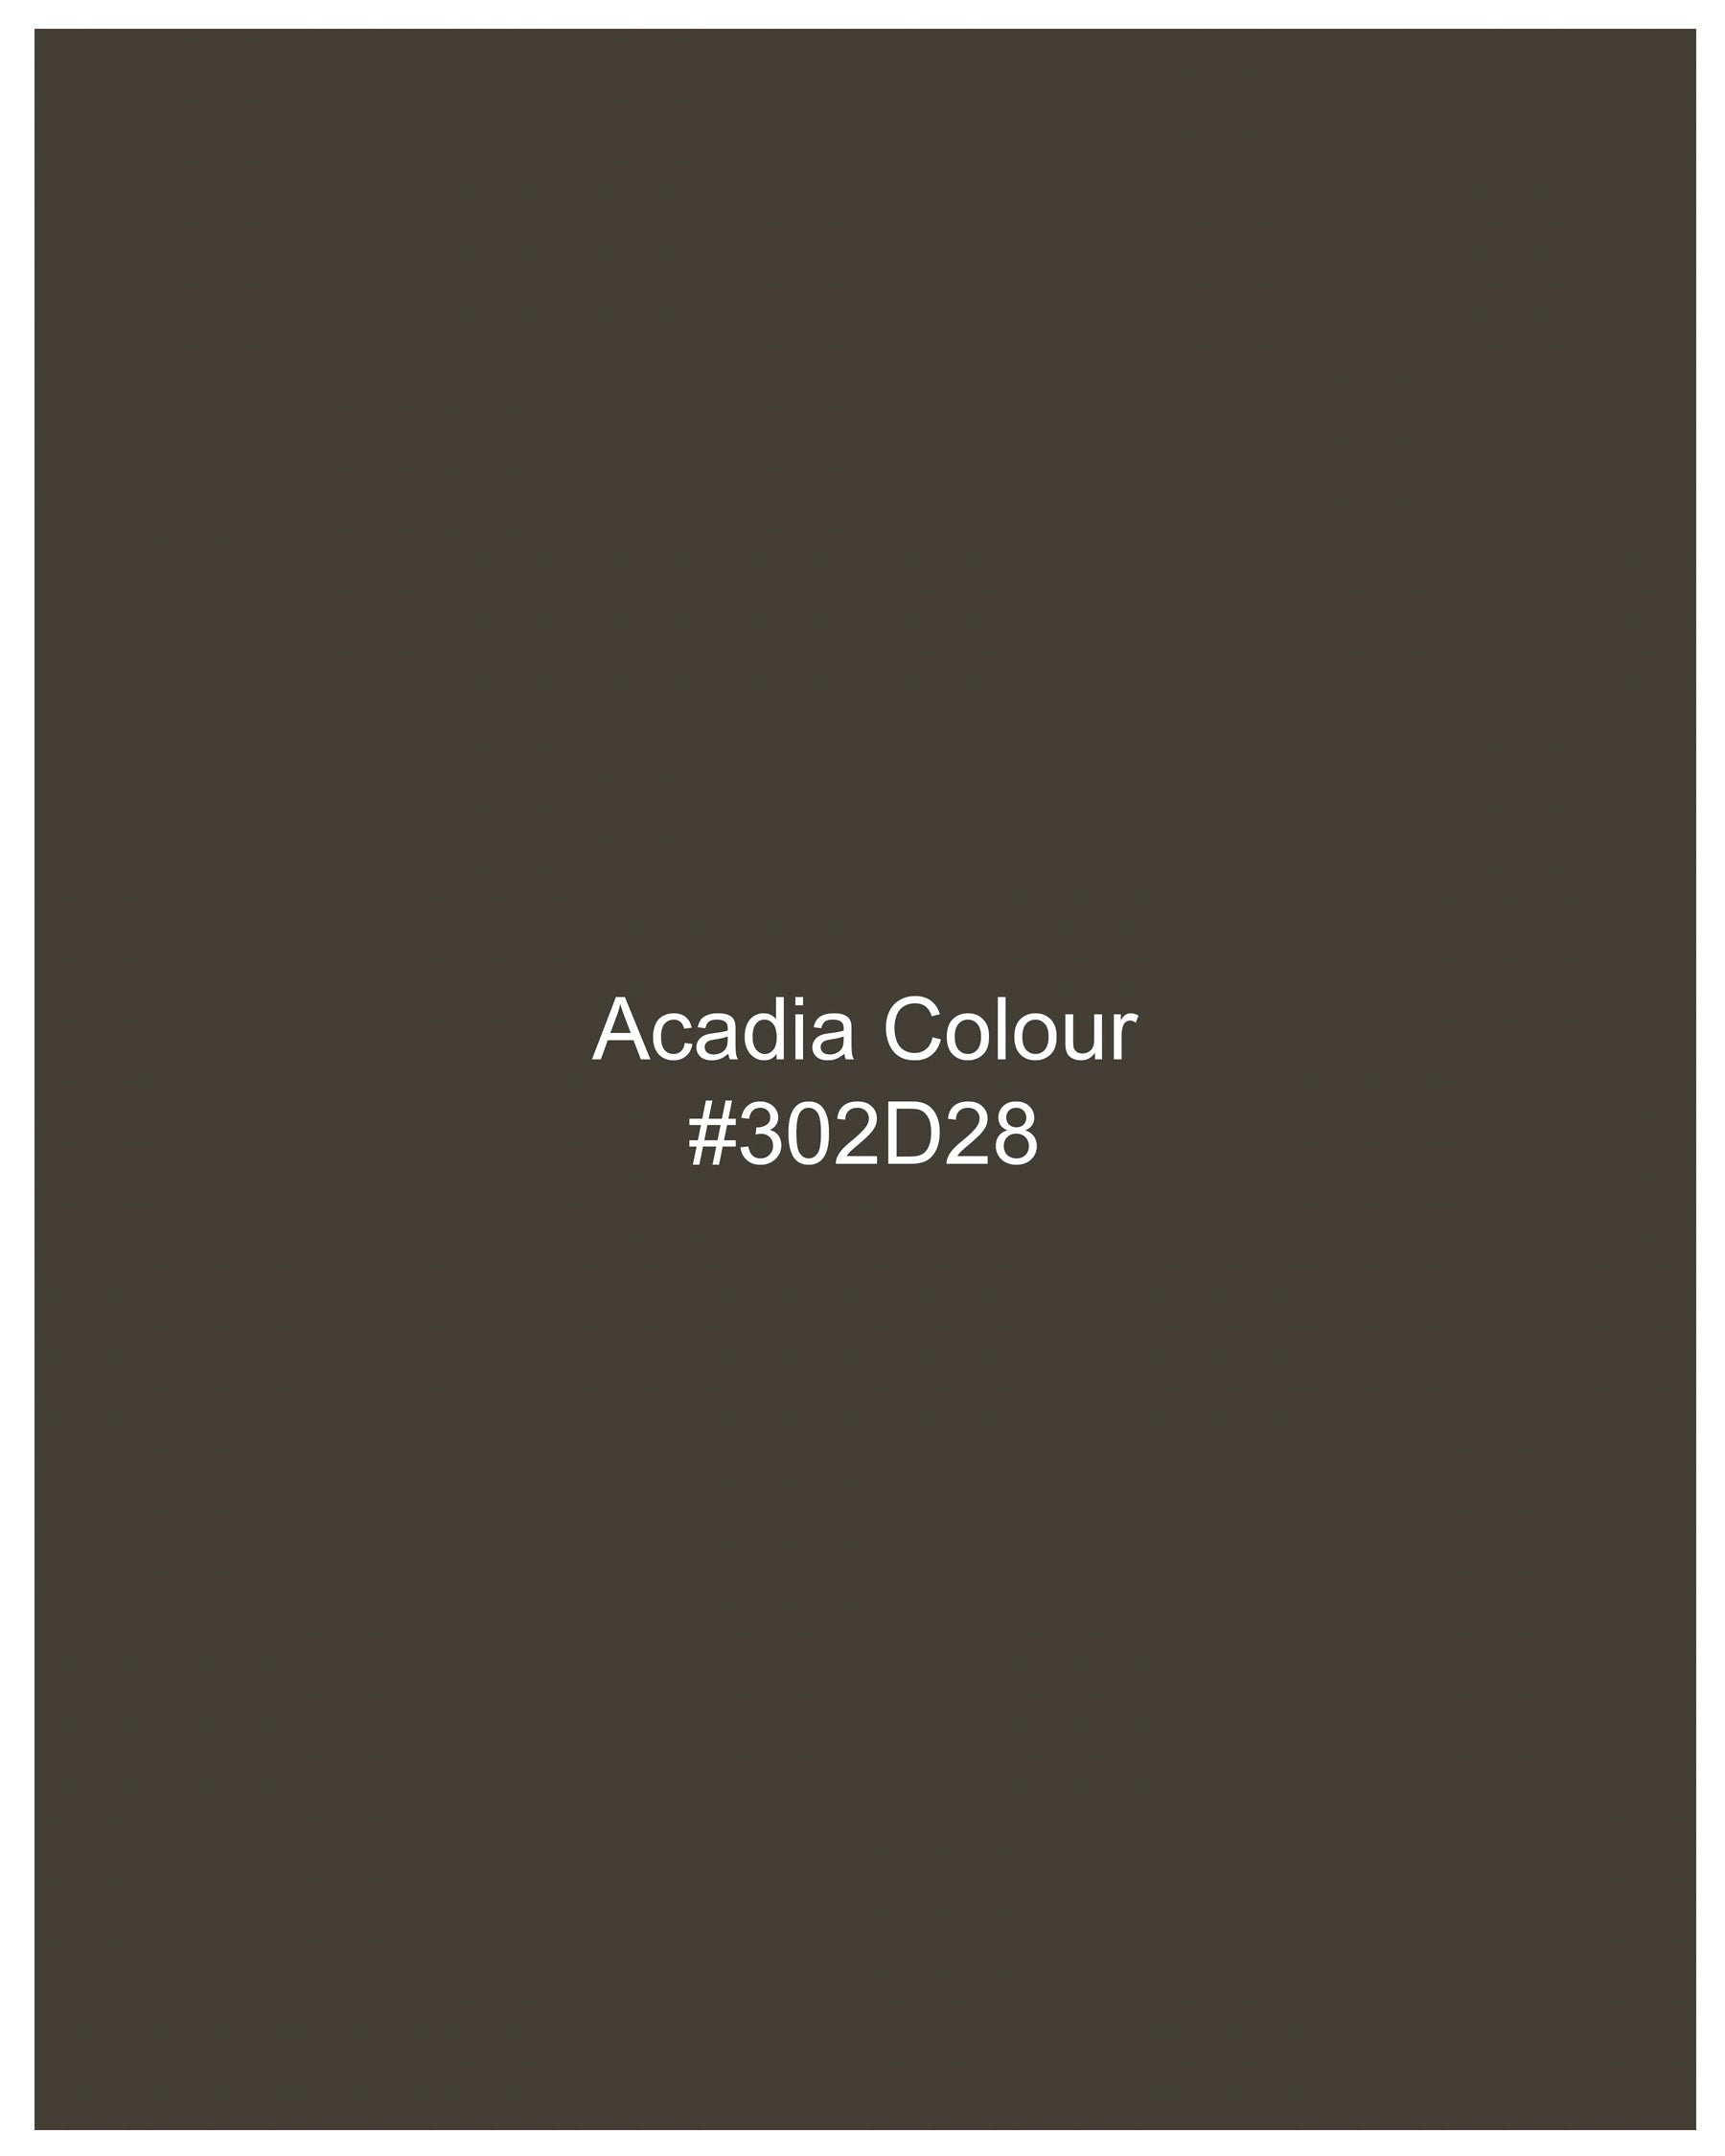 Acadia Grey Double-Breasted with Belt Closure Designer Trench Coat With Pant TCPT2111-DB-D35-36, TCPT2111-DB-D35-38, TCPT2111-DB-D35-40, TCPT2111-DB-D35-42, TCPT2111-DB-D35-44, TCPT2111-DB-D35-46, TCPT2111-DB-D35-48, TCPT2111-DB-D35-50, TCPT2111-DB-D35-52, TCPT2111-DB-D35-54, TCPT2111-DB-D35-56, TCPT2111-DB-D35-58, TCPT2111-DB-D35-60